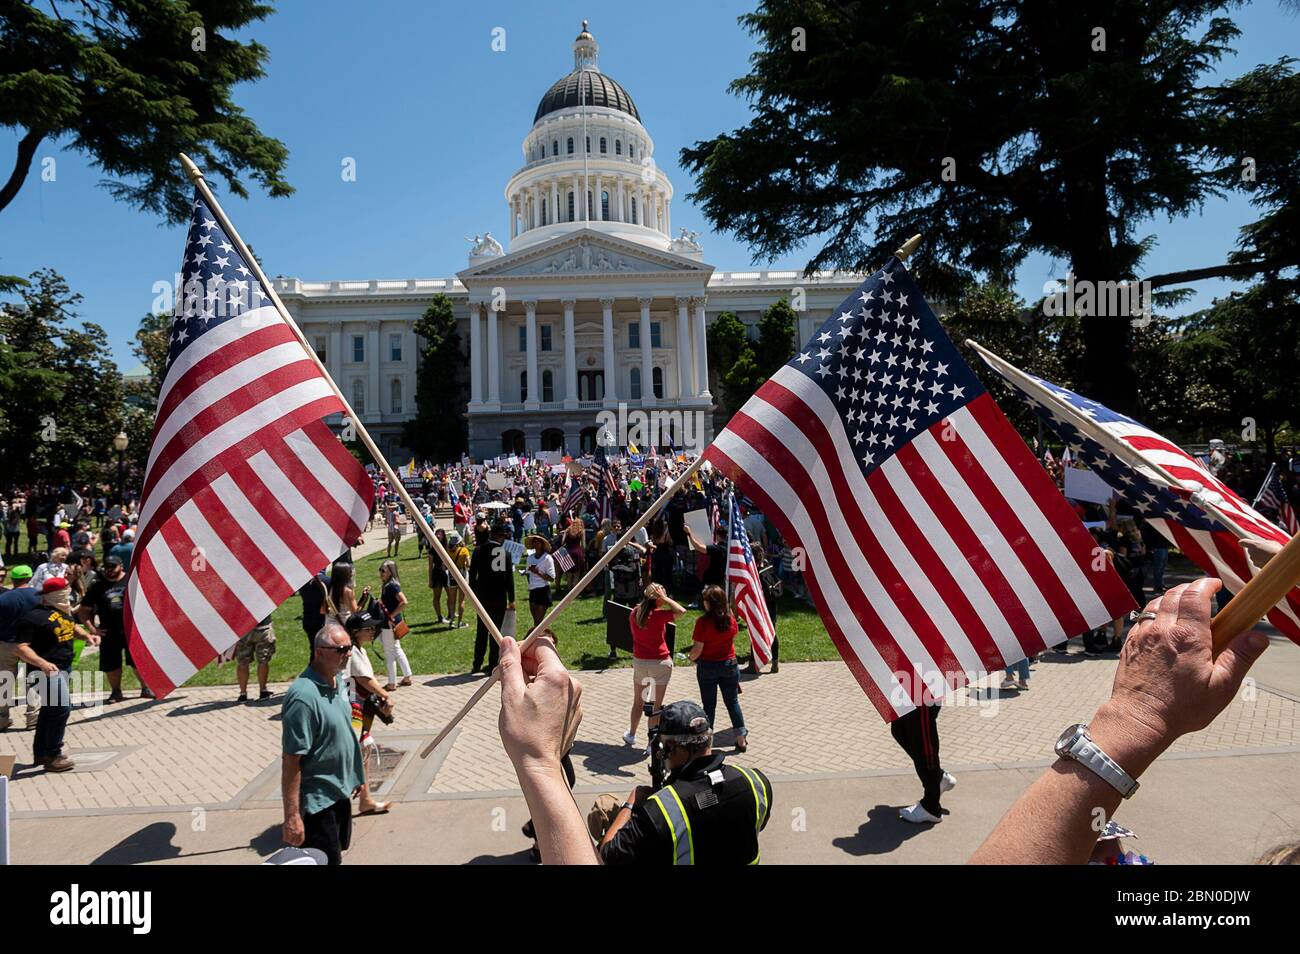 Sacramento, California, USA. 1st May, 2020. Protesters demonstrate at the Capitol in Sacramento against California Gov. Gavin Newsom's stay-at-home order intended to slow the spread of the coronavirus. Credit: Paul Kitagaki Jr/Sacramento Bee/ZUMA Wire/Alamy Live News Stock Photo